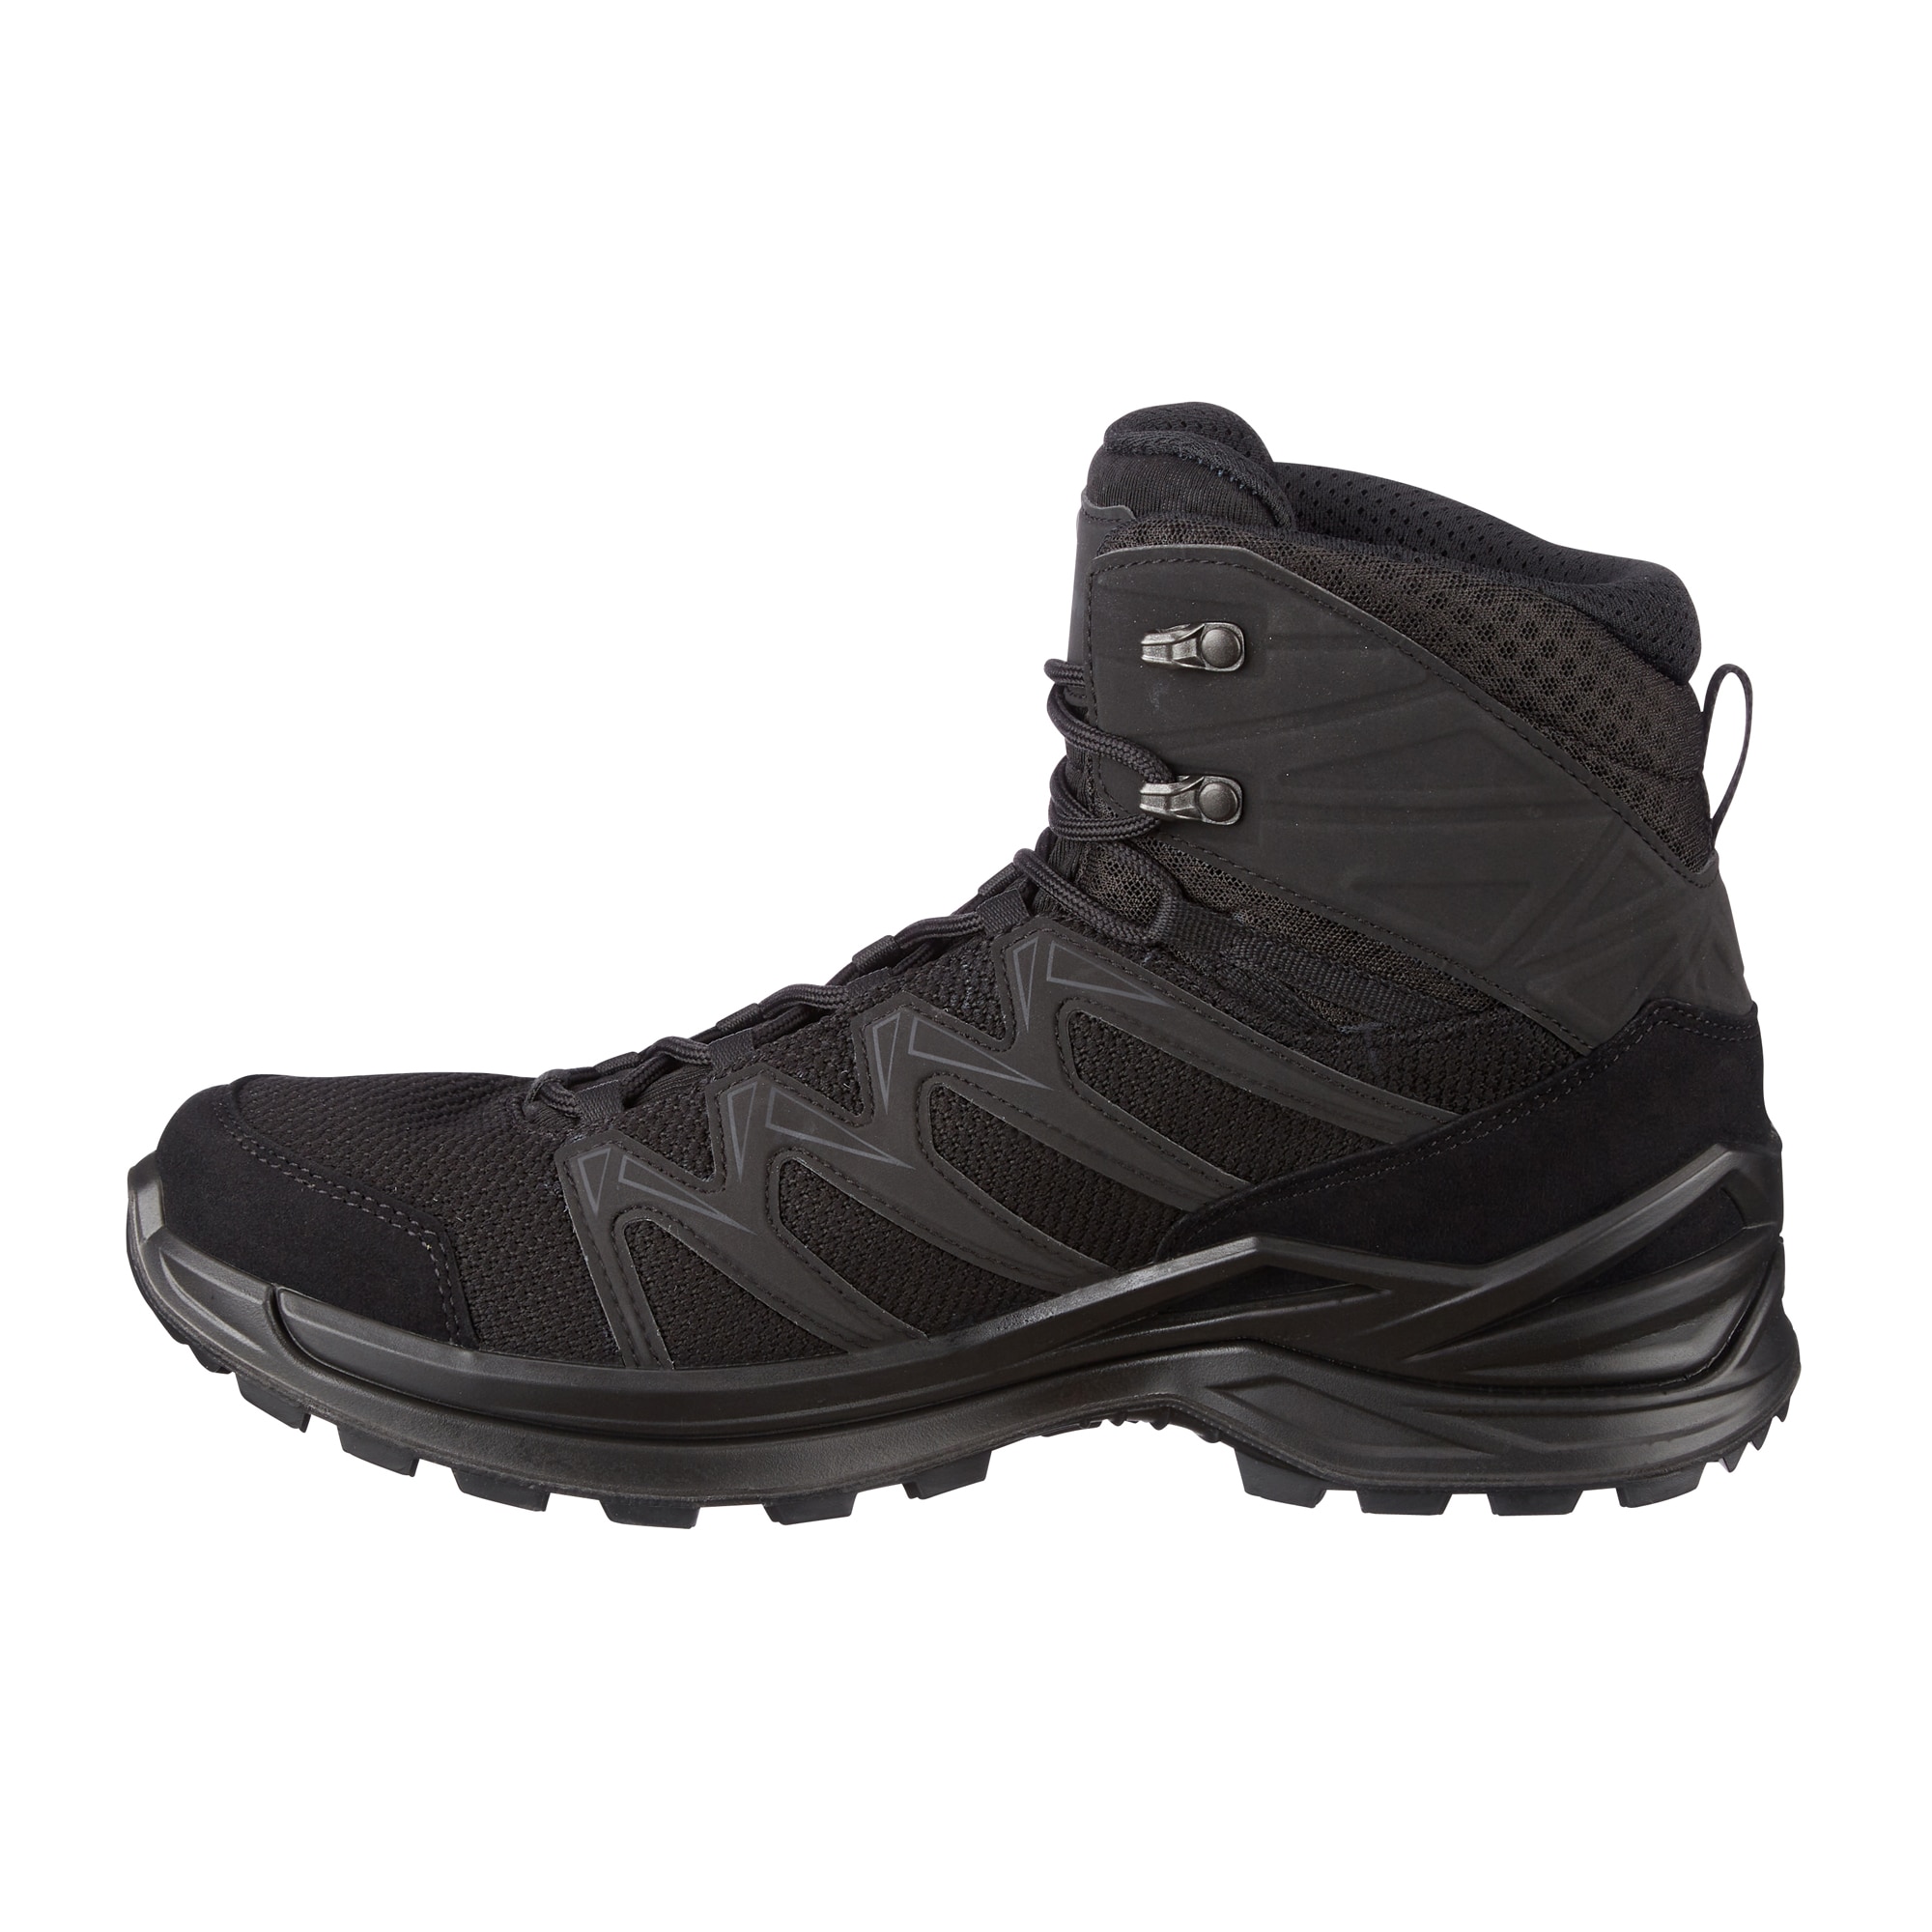 Attent pedaal Proficiat Purchase the LOWA Boots Innox Pro GTX Mid TF black by ASMC